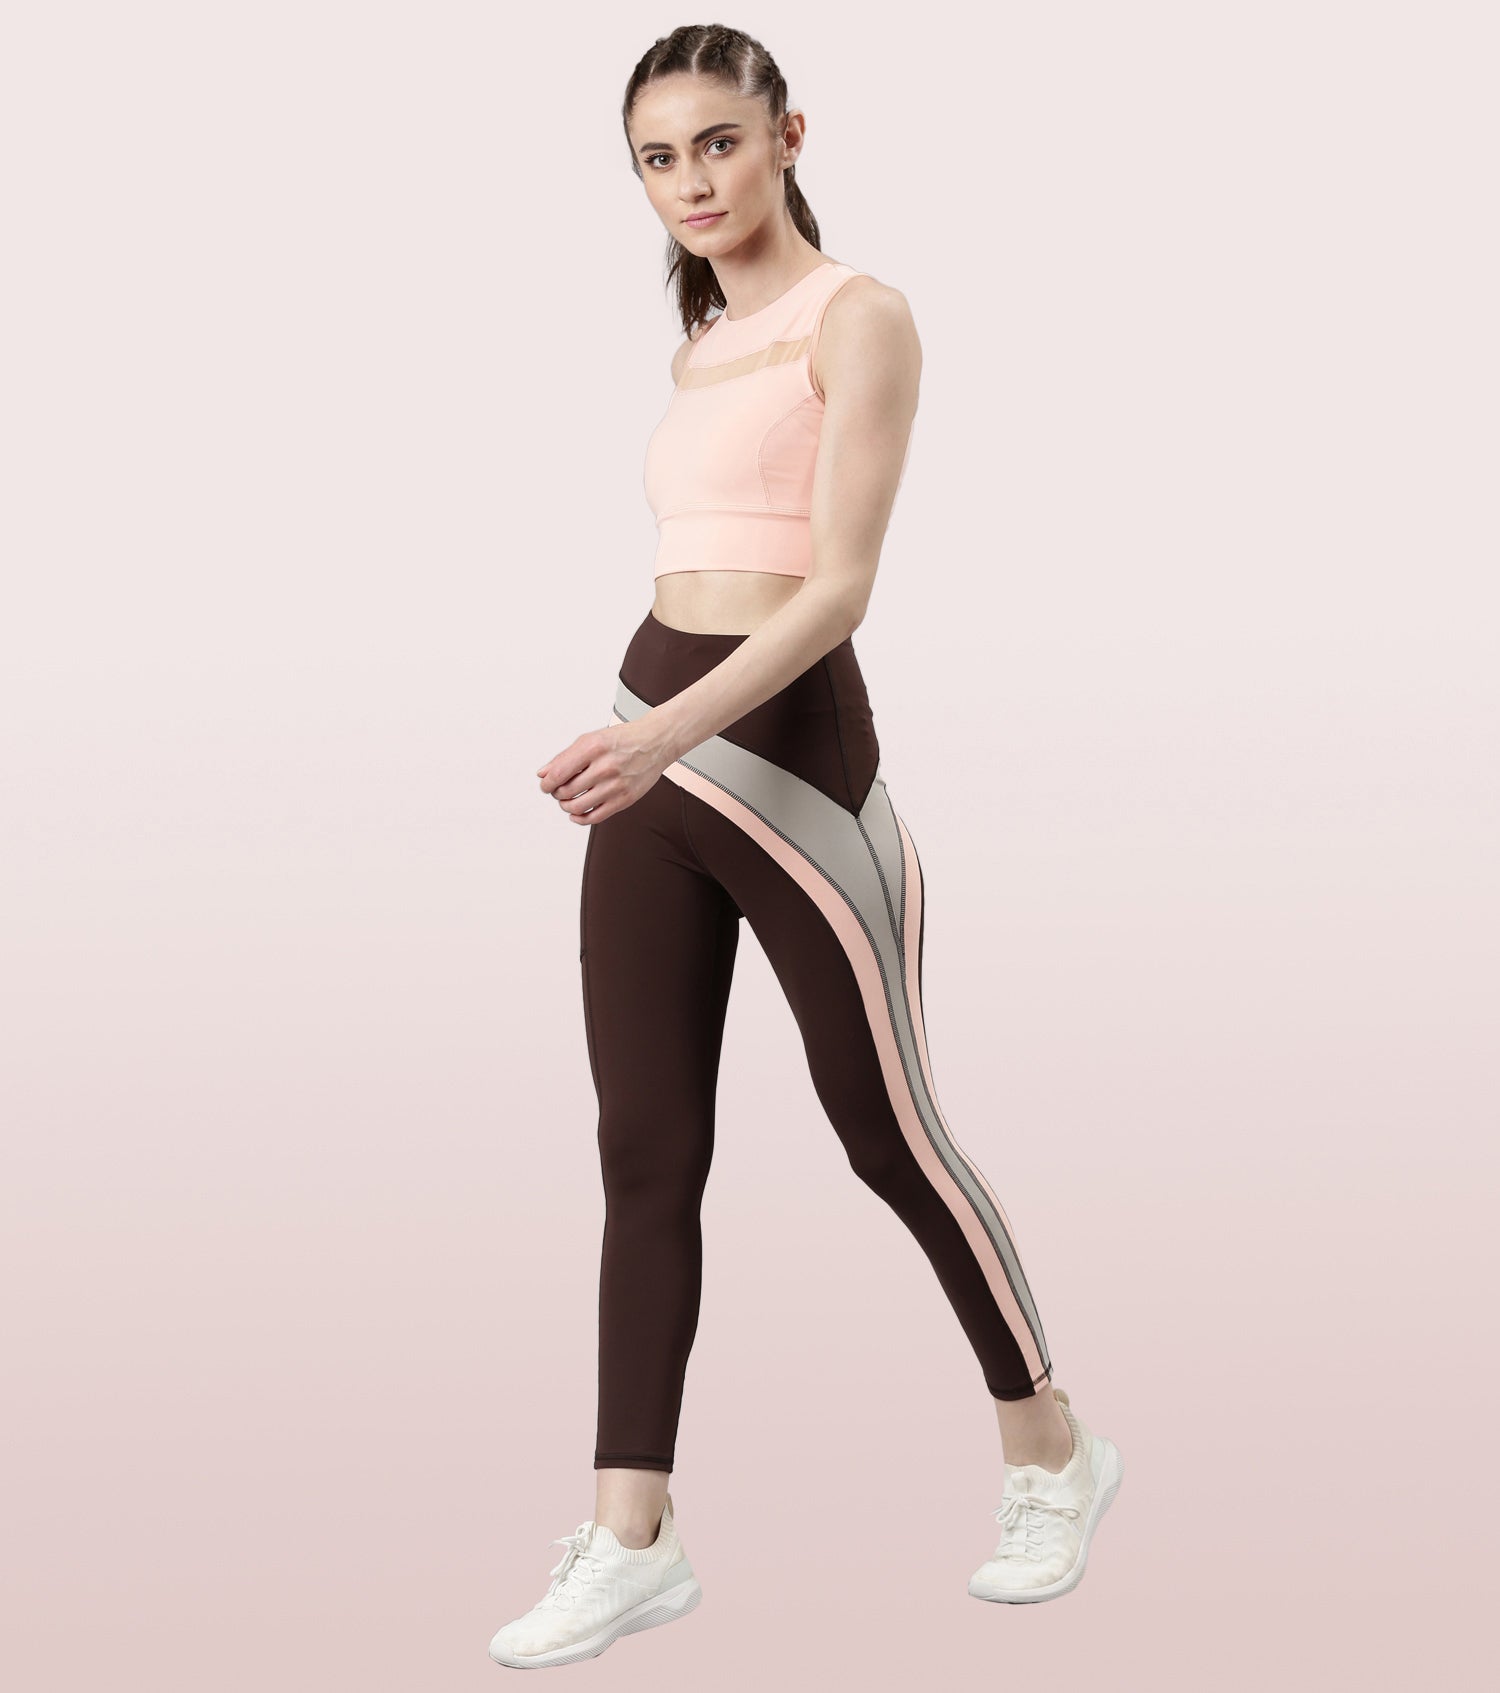 Active Solo Legging | Dry Fit High Waist Activewear Leggings